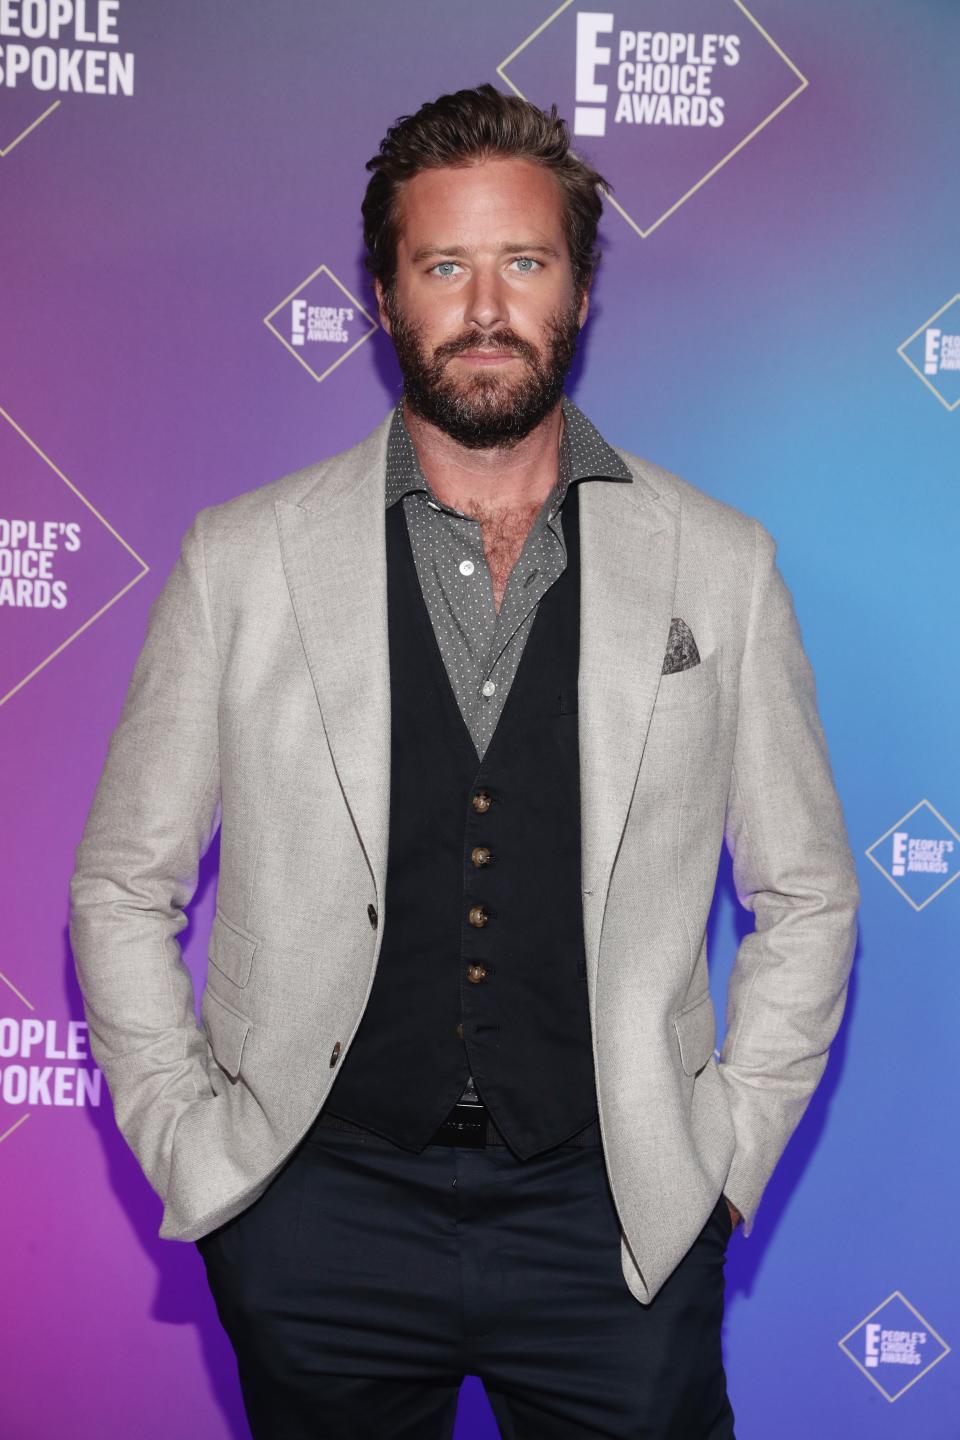 Armie Hammer at the the 2020 E! People's Choice Awards in Santa Monica, November 15, 2020.